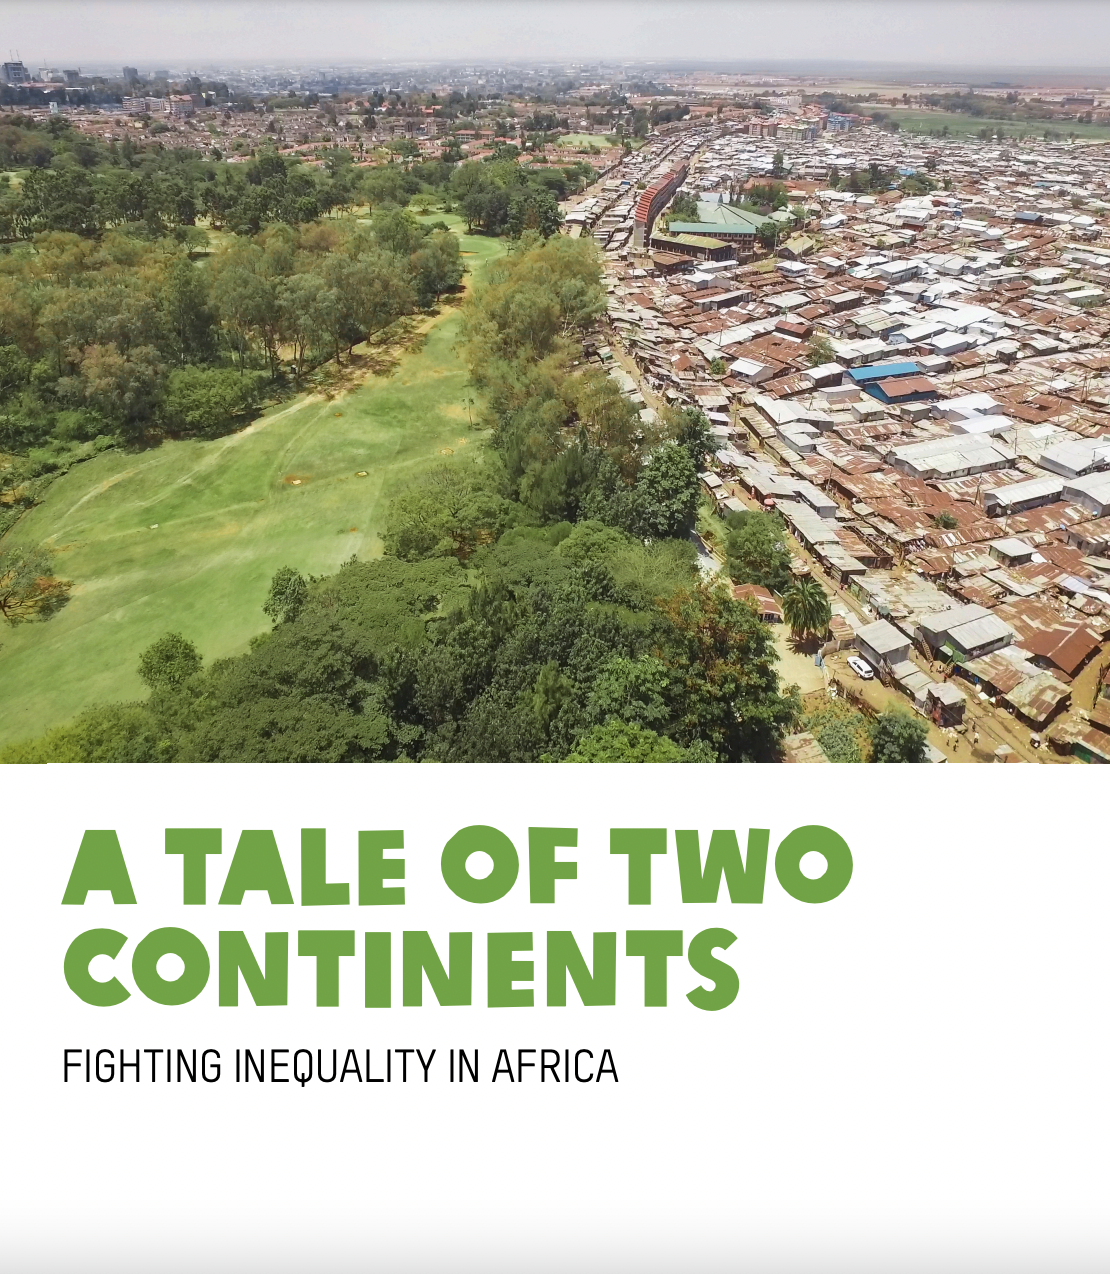 Report launch: “A Tale of Two Continents: Fighting inequality in Africa”